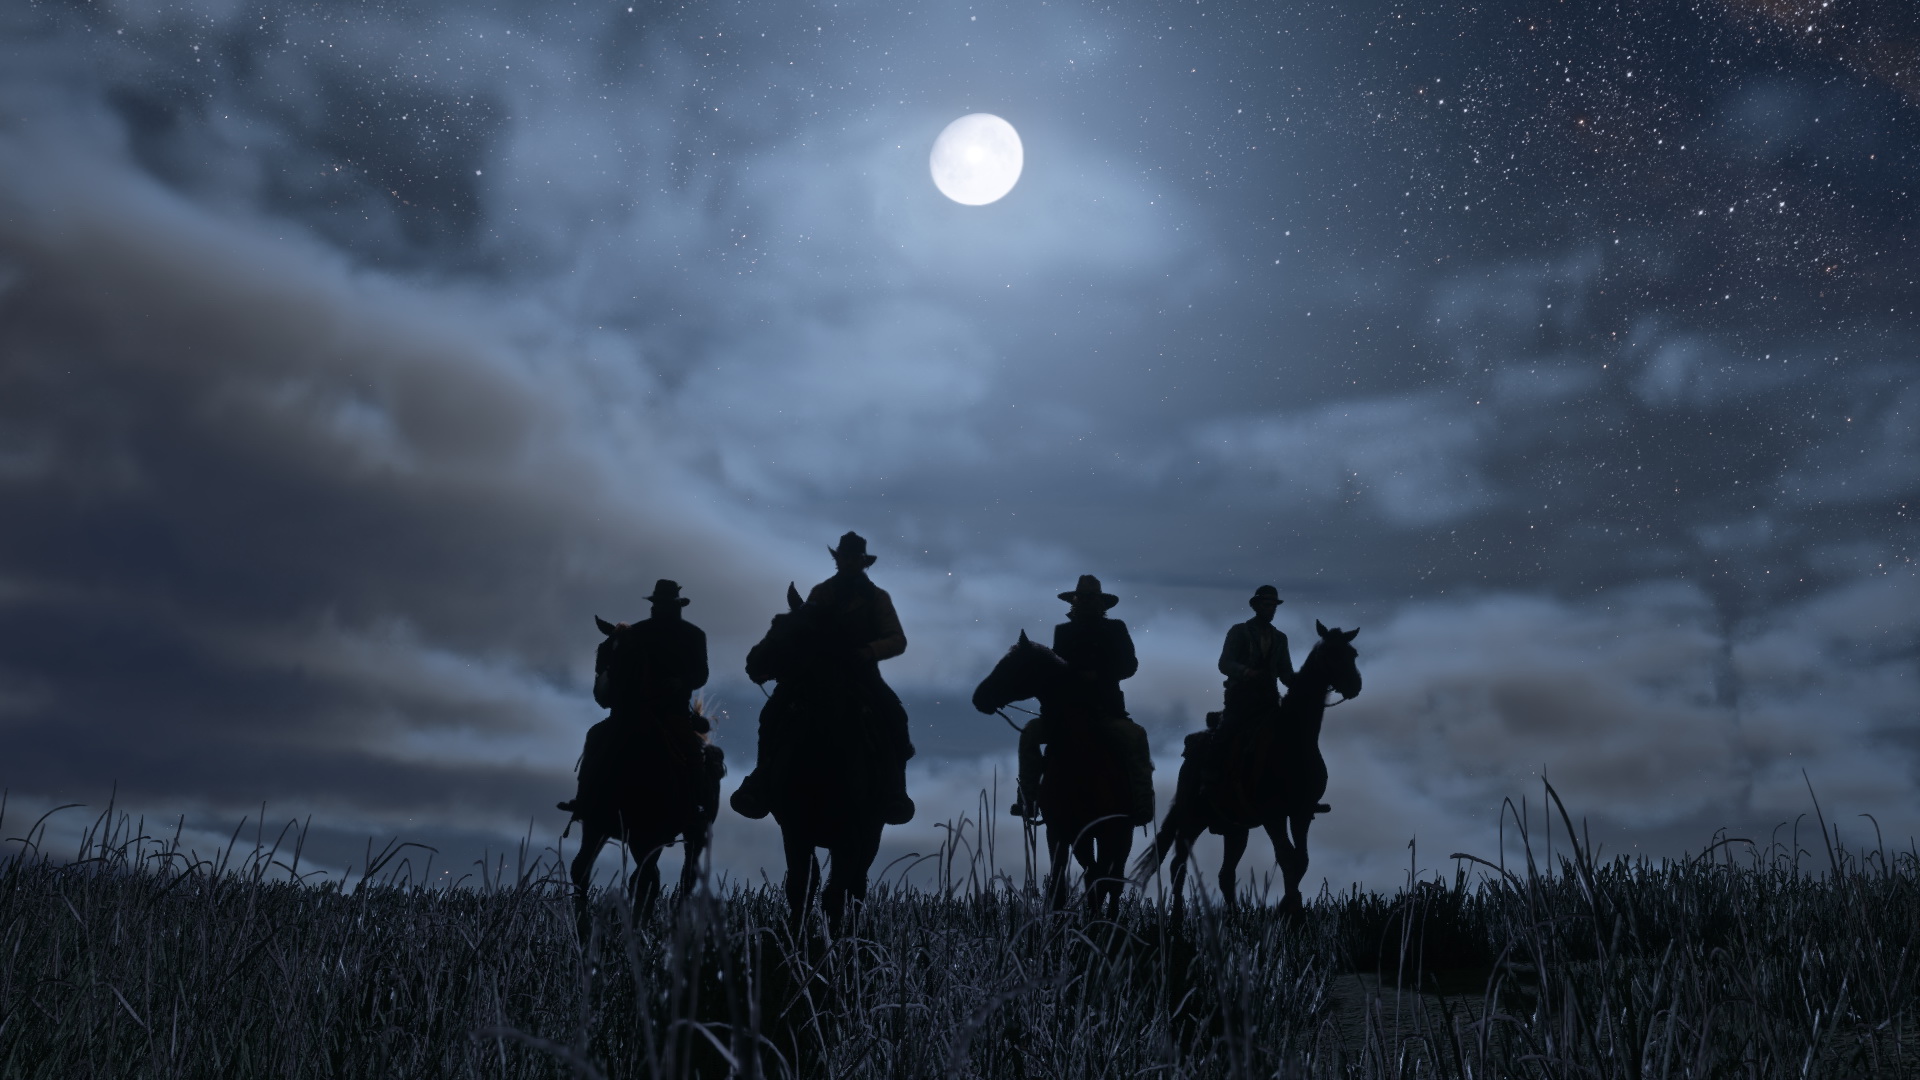 New Screenshots for Red Dead Redemption 2 #3